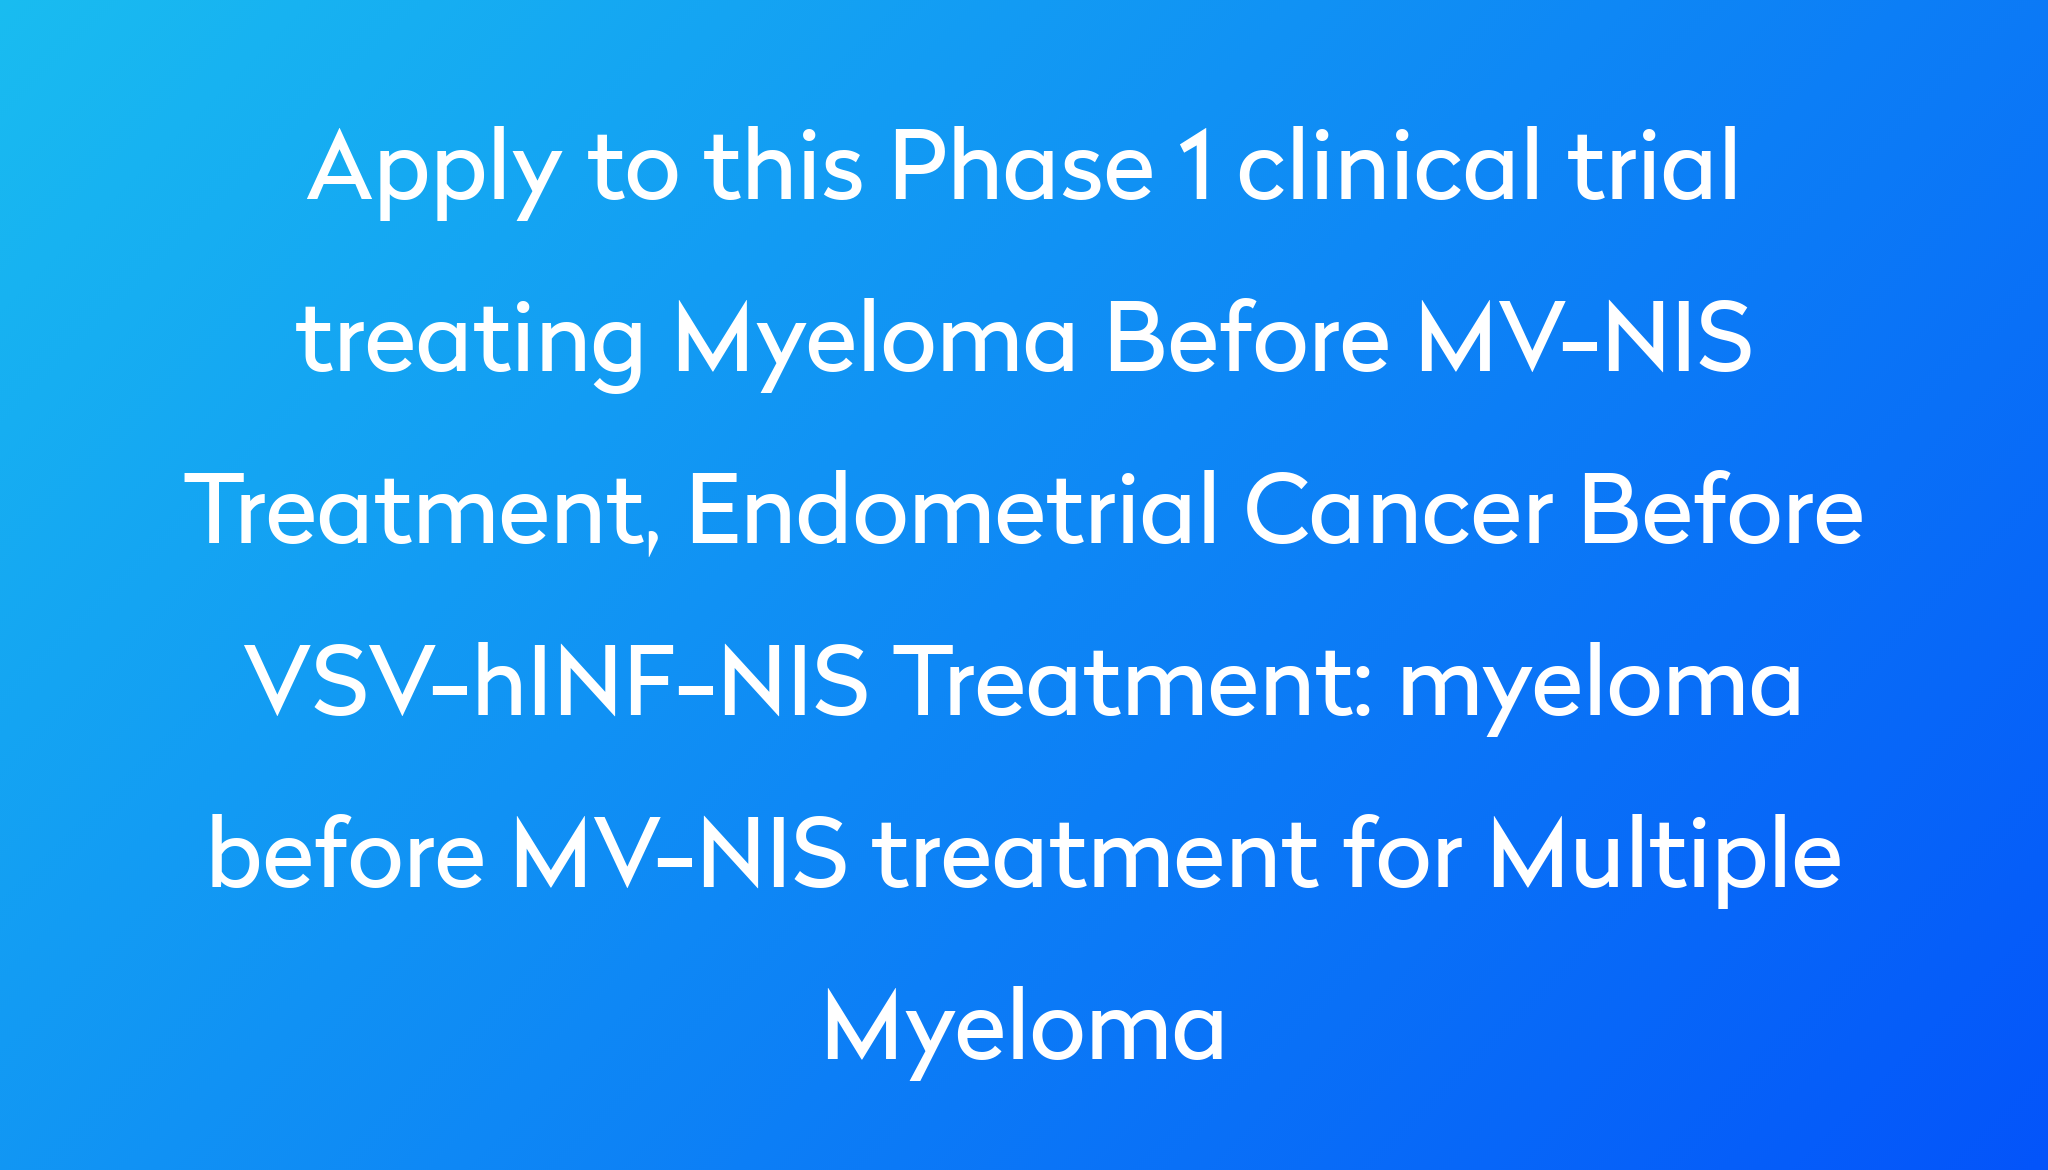 myeloma before MVNIS treatment for Multiple Myeloma Clinical Trial